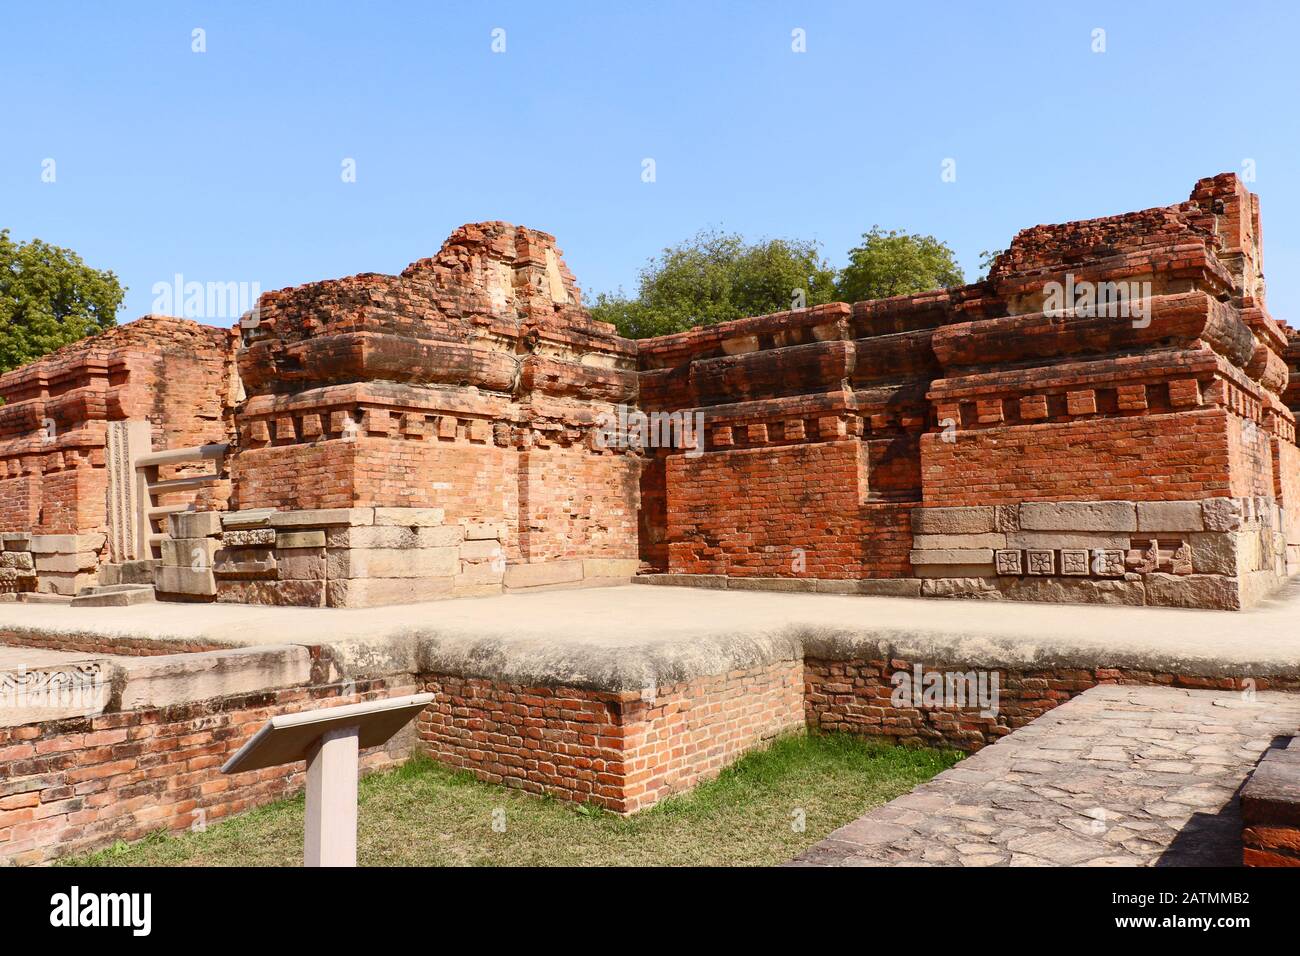 Dhamek Stupa - one of the most famous Buddhist stupas located in Sarnath built in 249 BCE during the reign of king Ashoka. Stock Photo